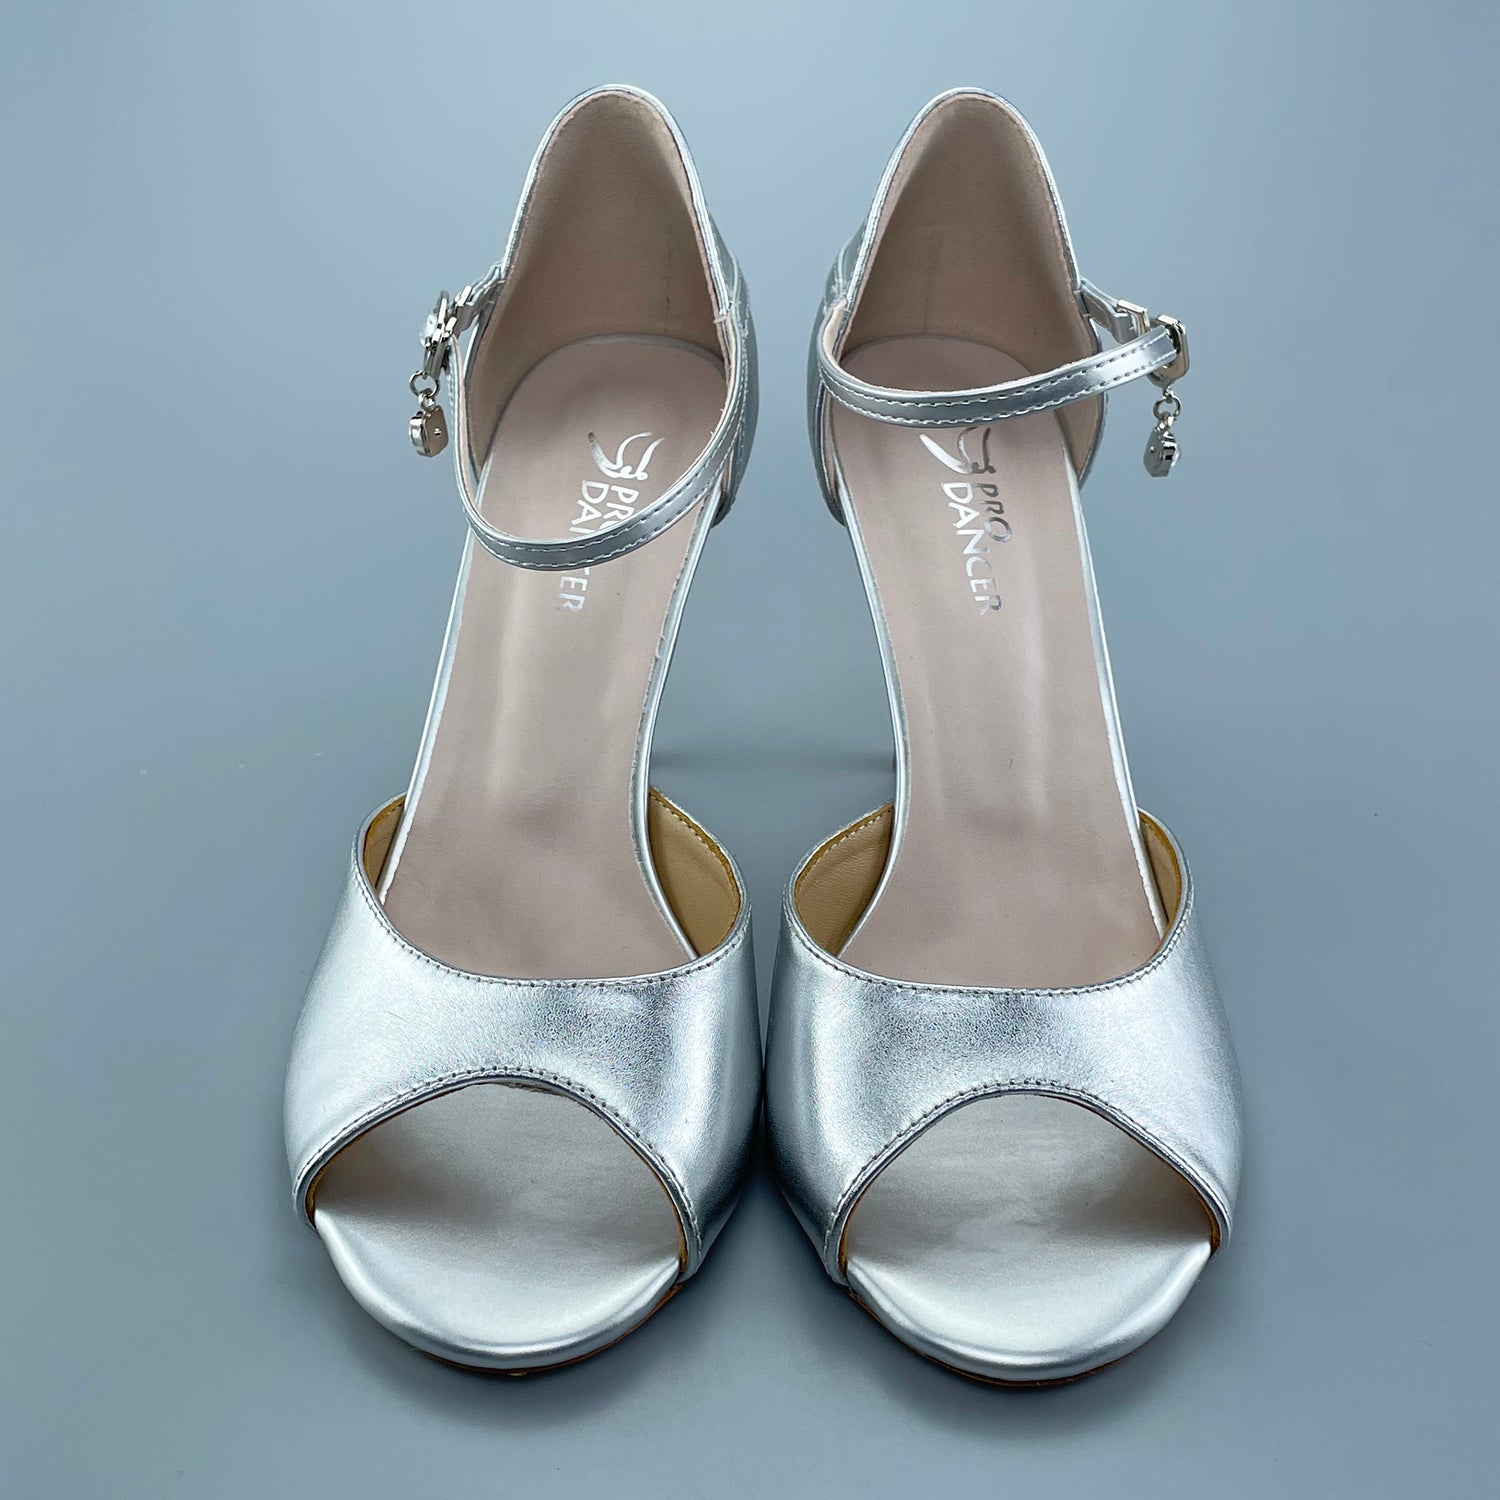 Pro Dancer Tango Shoes silver open-toe salsa heels with leather sole4